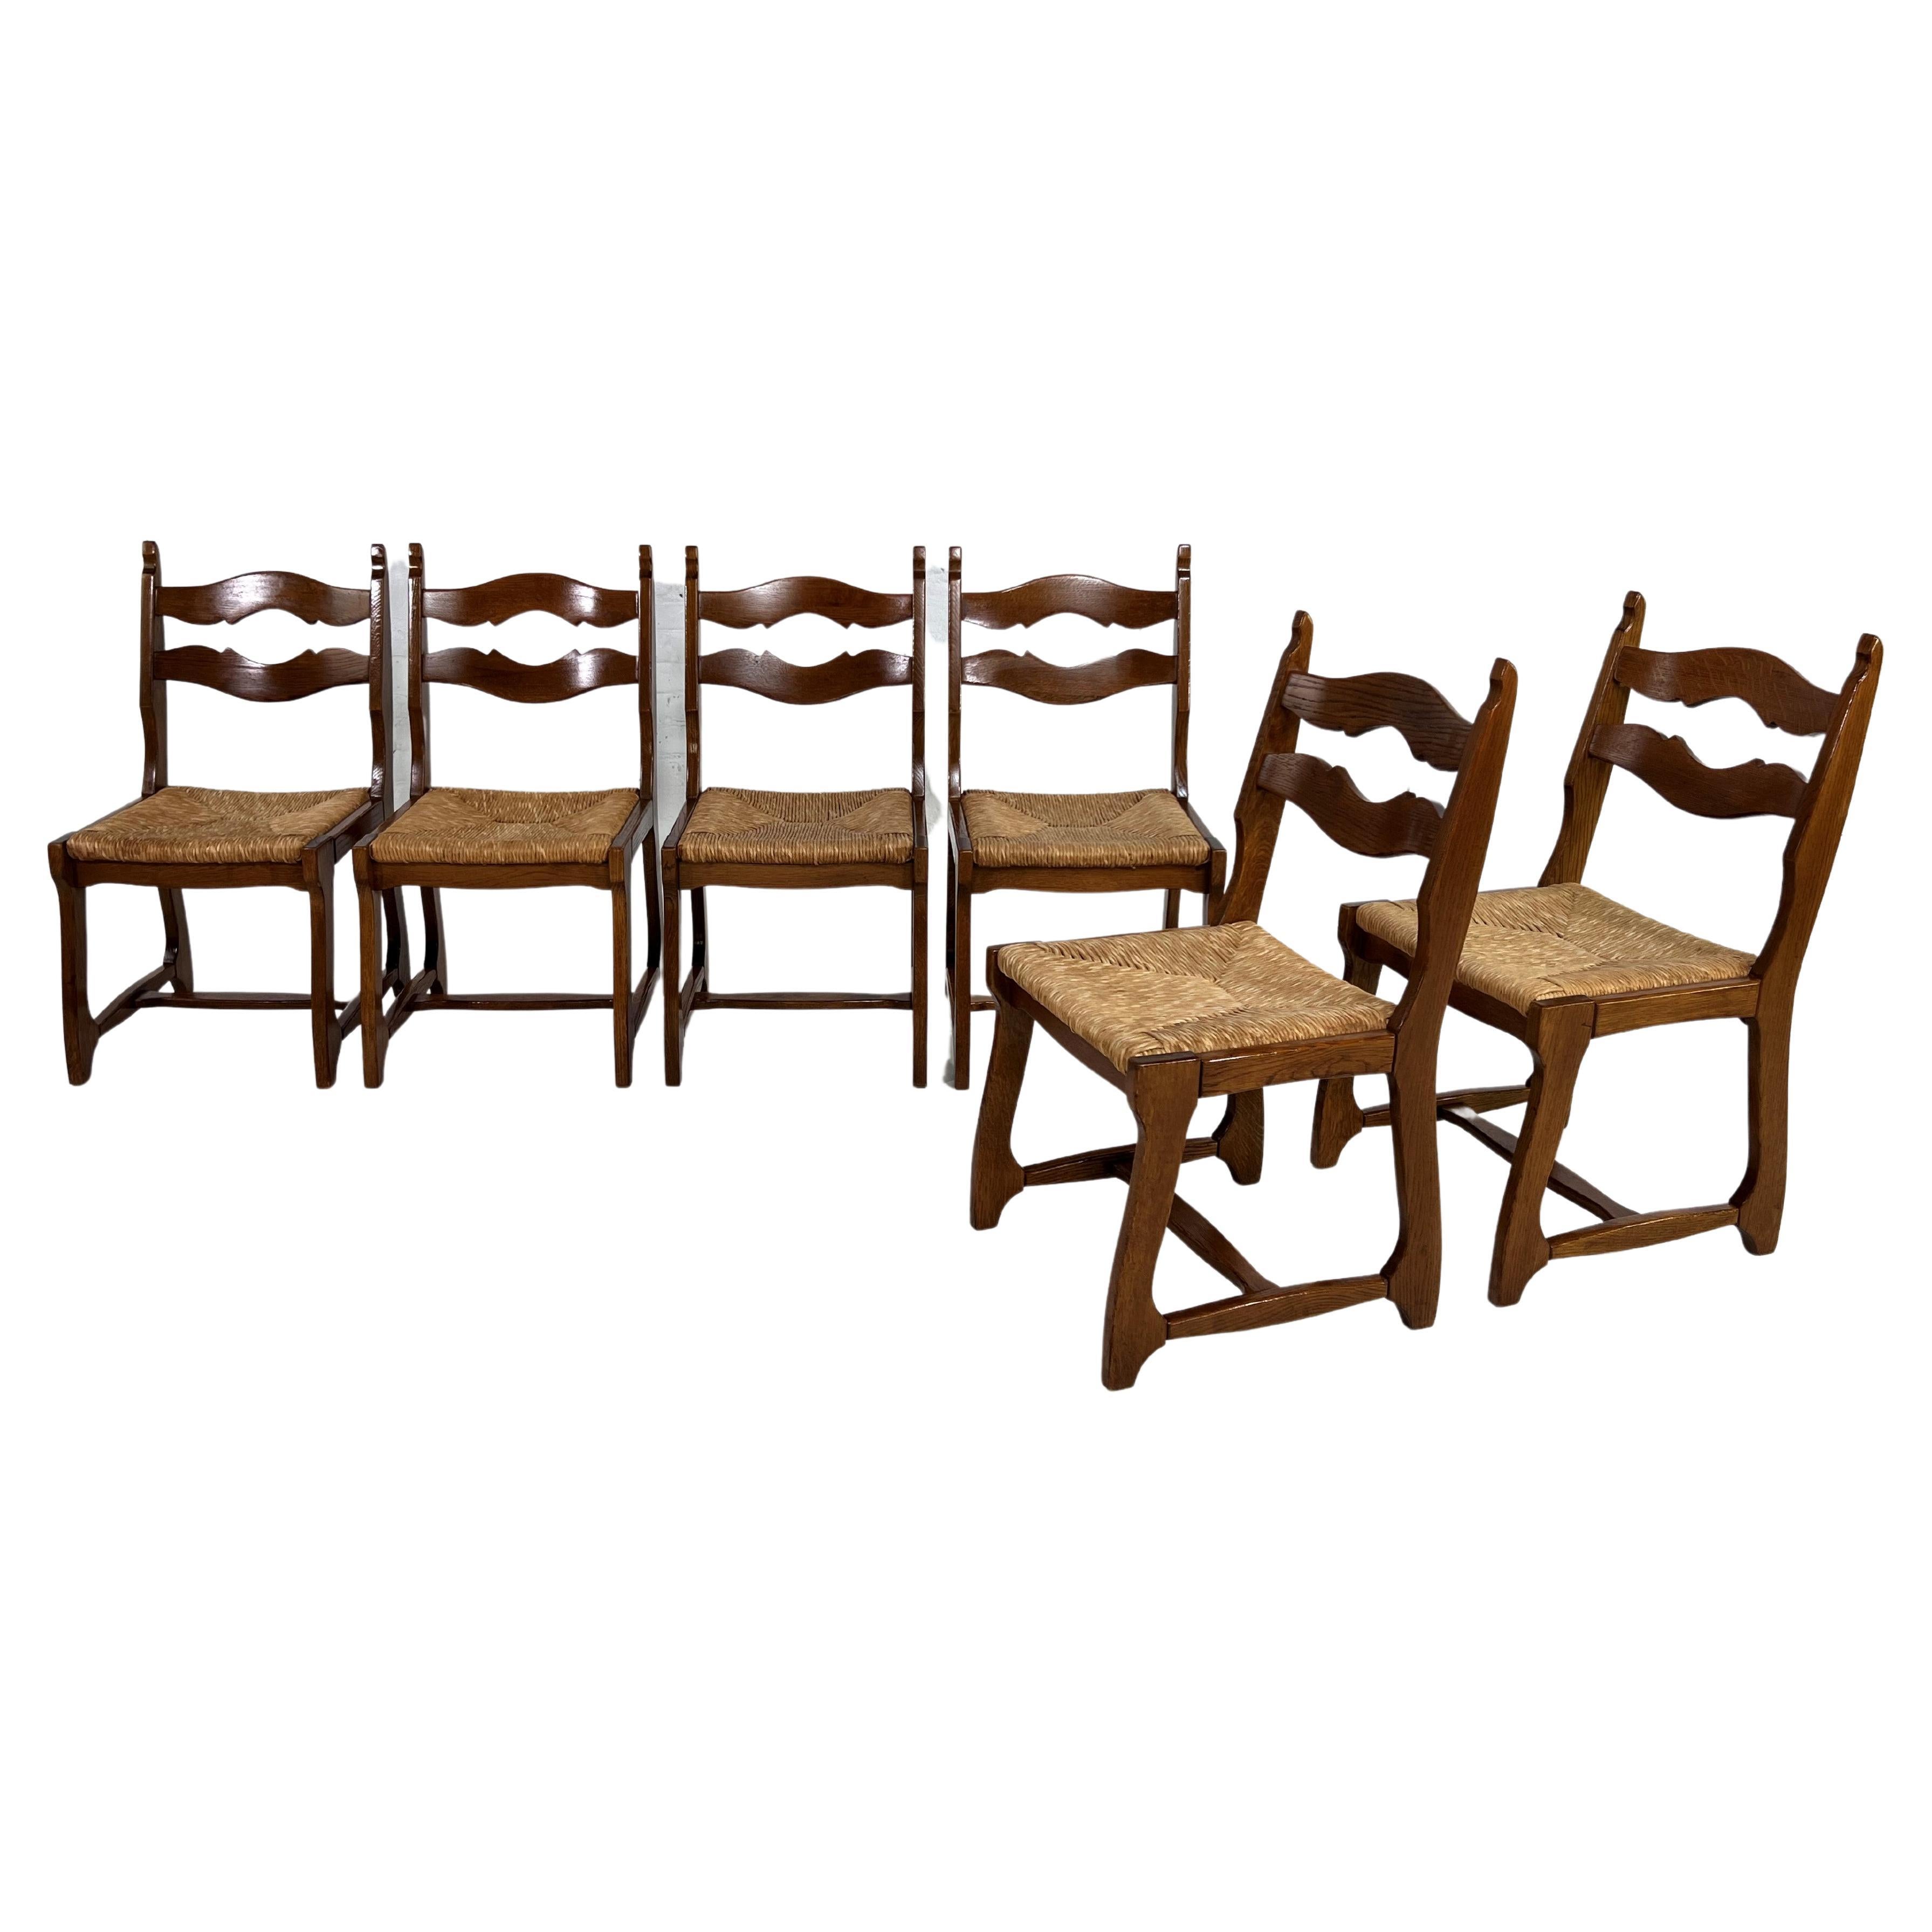 1950s Design Oak Wooden And Braided Straw Seats Set of 6 Chairs For Sale 4